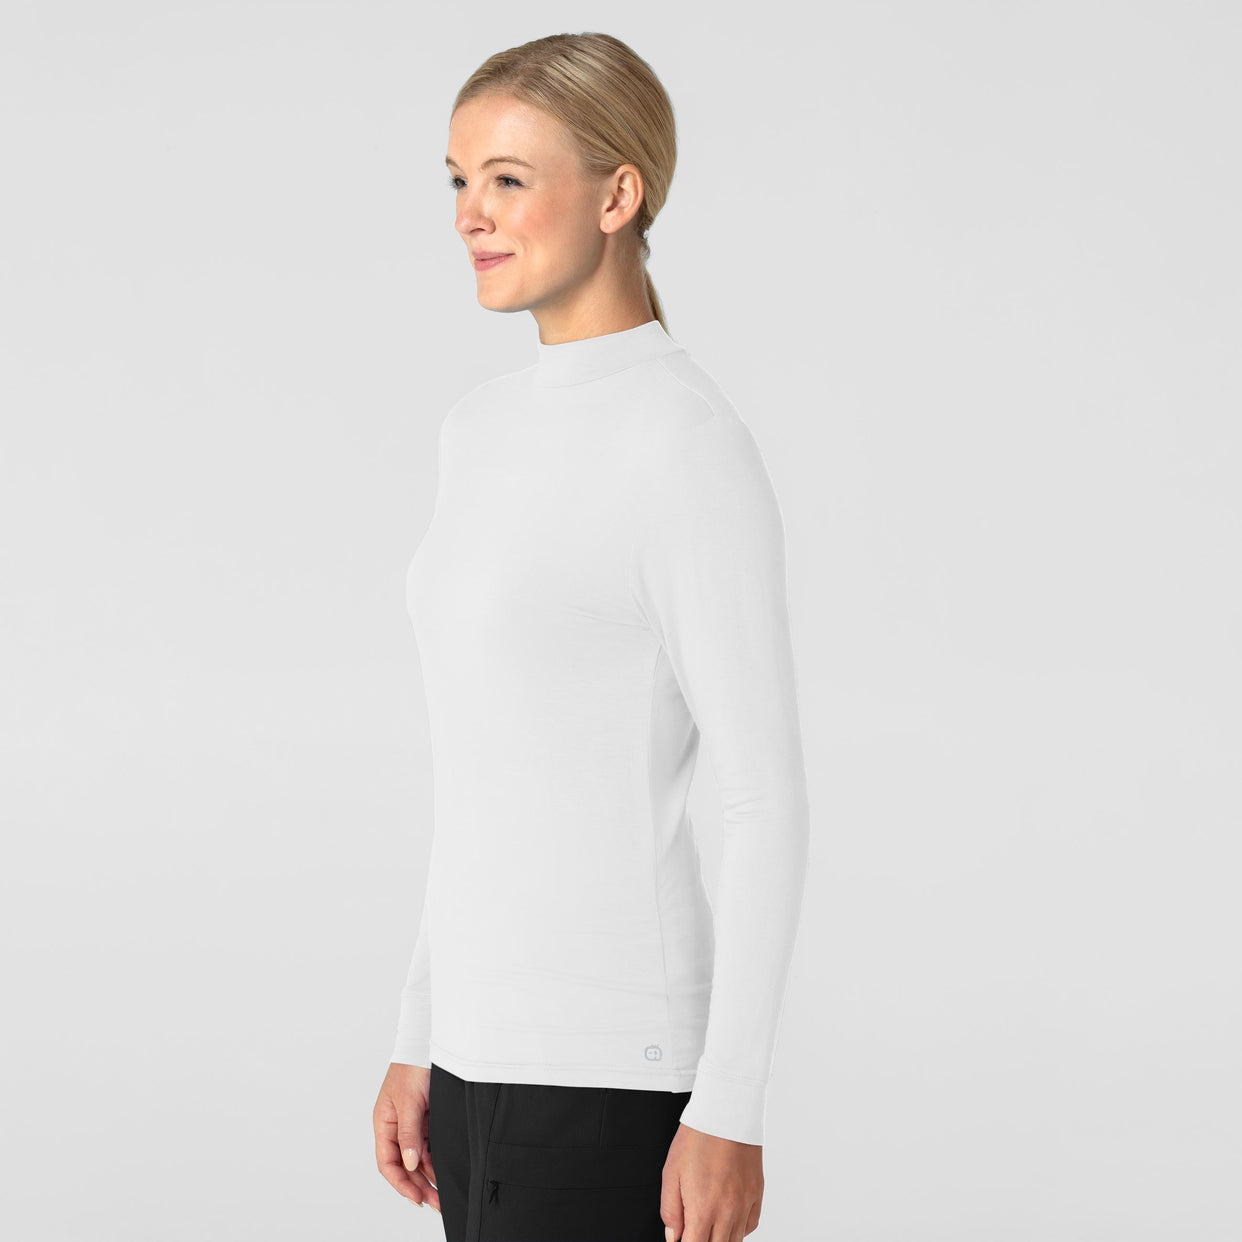 Knits and Layers Women’s Long Sleeve Mock Neck Silky Tee White side view